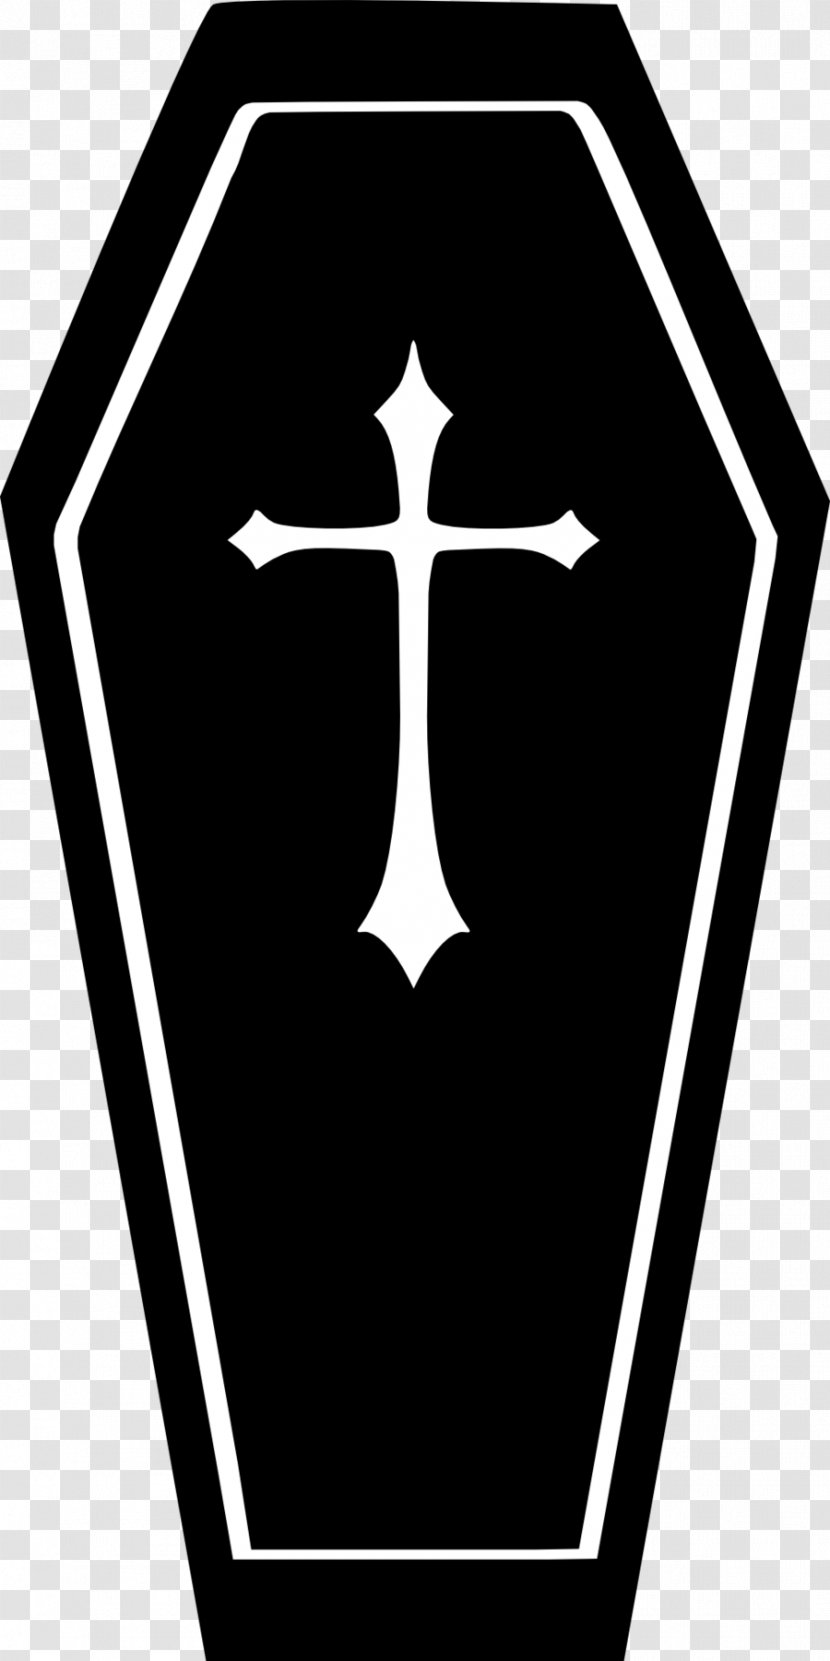 Clip Art Vector Graphics Image Coffin Royalty-free - Monochrome Photography - Symmetry Transparent PNG